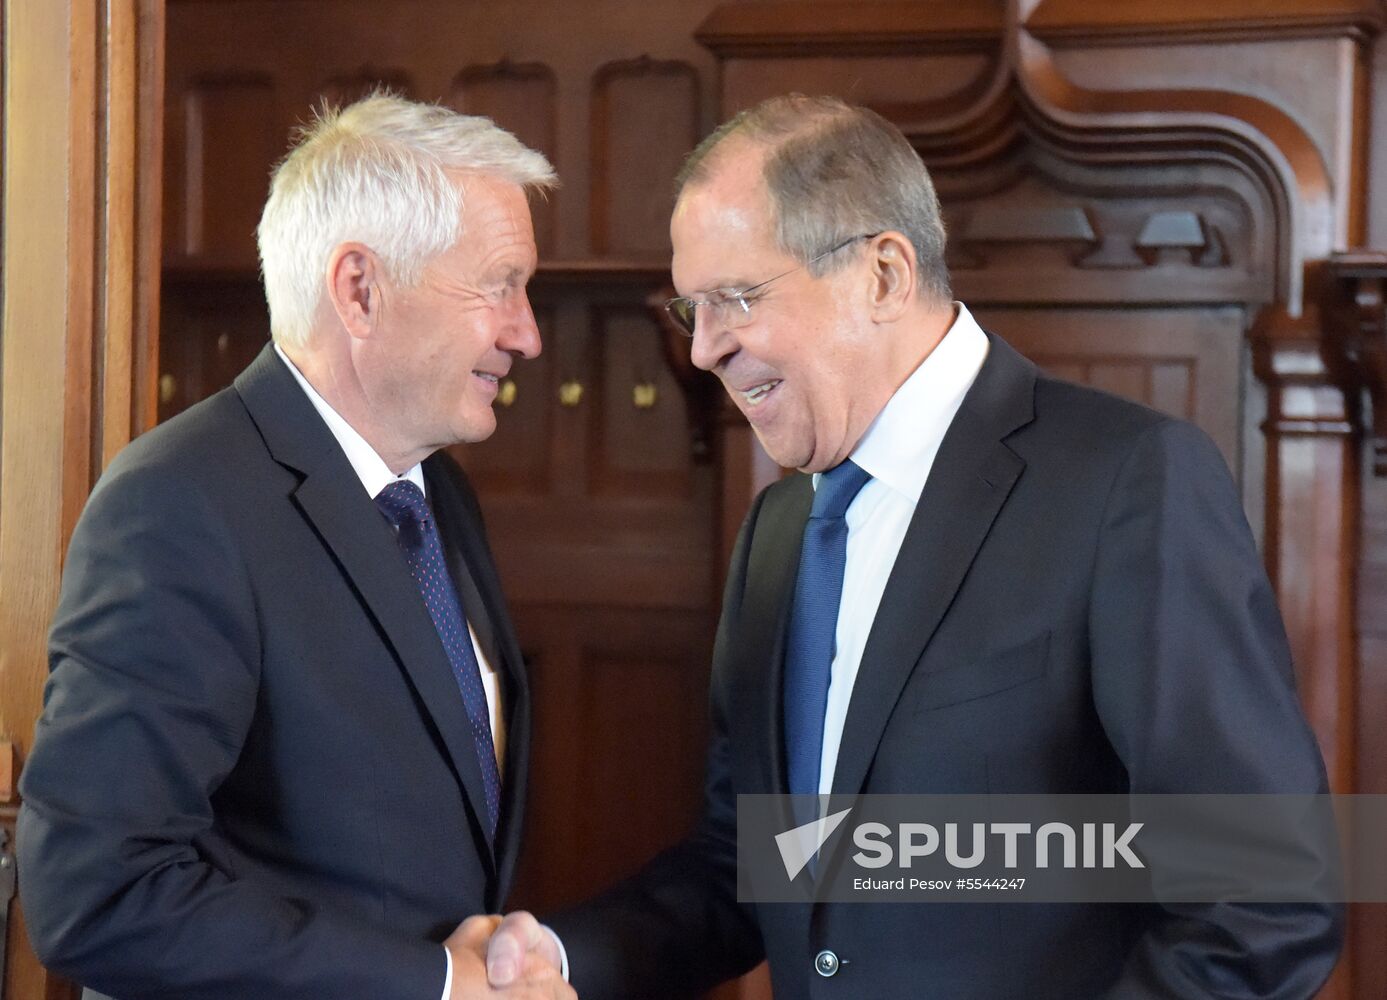 Russian Foreign Minister Sergei Lavrov meets with Secretary General of the Council of Europe Thorbjorn Jagland